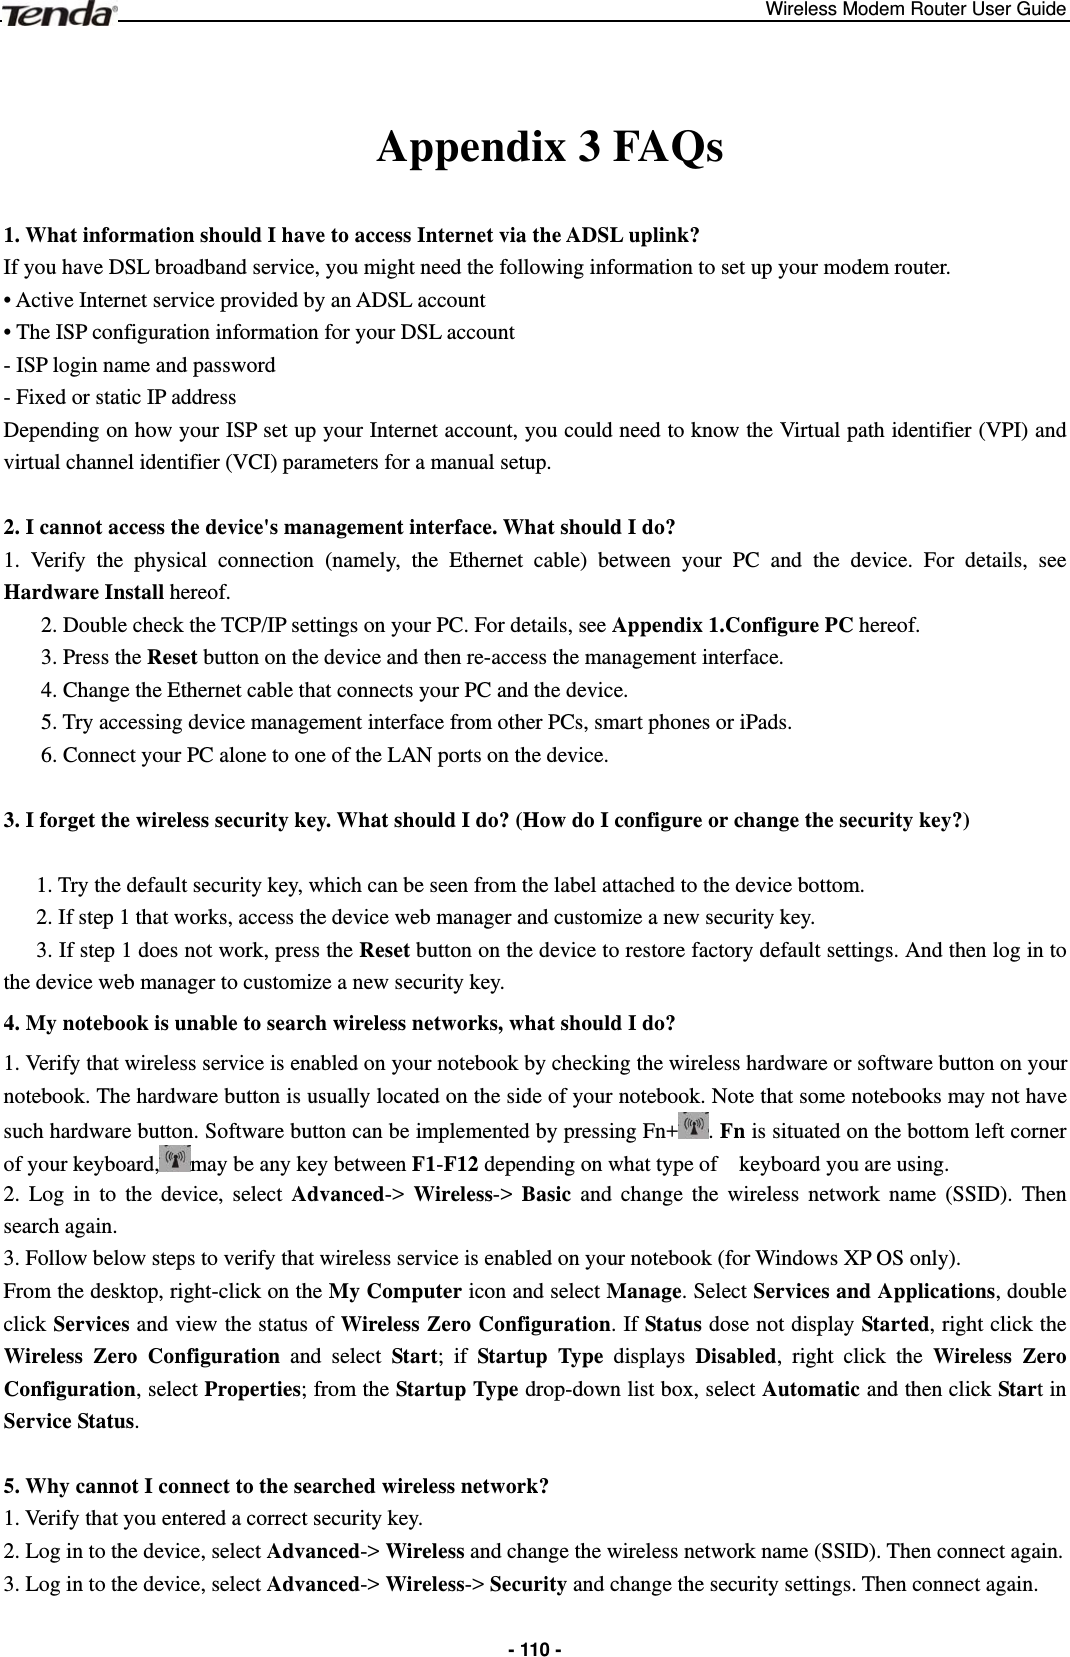 Wireless Modem Router User Guide  - 110 - Appendix 3 FAQs 1. What information should I have to access Internet via the ADSL uplink?   If you have DSL broadband service, you might need the following information to set up your modem router.   • Active Internet service provided by an ADSL account • The ISP configuration information for your DSL account - ISP login name and password - Fixed or static IP address Depending on how your ISP set up your Internet account, you could need to know the Virtual path identifier (VPI) and virtual channel identifier (VCI) parameters for a manual setup.  2. I cannot access the device&apos;s management interface. What should I do?   1. Verify the physical connection (namely, the Ethernet cable) between your PC and the device. For details, see Hardware Install hereof. 2. Double check the TCP/IP settings on your PC. For details, see Appendix 1.Configure PC hereof. 3. Press the Reset button on the device and then re-access the management interface. 4. Change the Ethernet cable that connects your PC and the device. 5. Try accessing device management interface from other PCs, smart phones or iPads. 6. Connect your PC alone to one of the LAN ports on the device.  3. I forget the wireless security key. What should I do? (How do I configure or change the security key?)  1. Try the default security key, which can be seen from the label attached to the device bottom. 2. If step 1 that works, access the device web manager and customize a new security key. 3. If step 1 does not work, press the Reset button on the device to restore factory default settings. And then log in to the device web manager to customize a new security key. 4. My notebook is unable to search wireless networks, what should I do? 1. Verify that wireless service is enabled on your notebook by checking the wireless hardware or software button on your notebook. The hardware button is usually located on the side of your notebook. Note that some notebooks may not have such hardware button. Software button can be implemented by pressing Fn+ . Fn is situated on the bottom left corner of your keyboard, may be any key between F1-F12 depending on what type of    keyboard you are using. 2. Log in to the device, select Advanced-&gt; Wireless-&gt; Basic and change the wireless network name (SSID). Then search again. 3. Follow below steps to verify that wireless service is enabled on your notebook (for Windows XP OS only). From the desktop, right-click on the My Computer icon and select Manage. Select Services and Applications, double click Services and view the status of Wireless Zero Configuration. If Status dose not display Started, right click the Wireless Zero Configuration and select Start; if Startup Type displays Disabled, right click the Wireless Zero Configuration, select Properties; from the Startup Type drop-down list box, select Automatic and then click Start in Service Status.  5. Why cannot I connect to the searched wireless network?   1. Verify that you entered a correct security key. 2. Log in to the device, select Advanced-&gt; Wireless and change the wireless network name (SSID). Then connect again. 3. Log in to the device, select Advanced-&gt; Wireless-&gt; Security and change the security settings. Then connect again.  